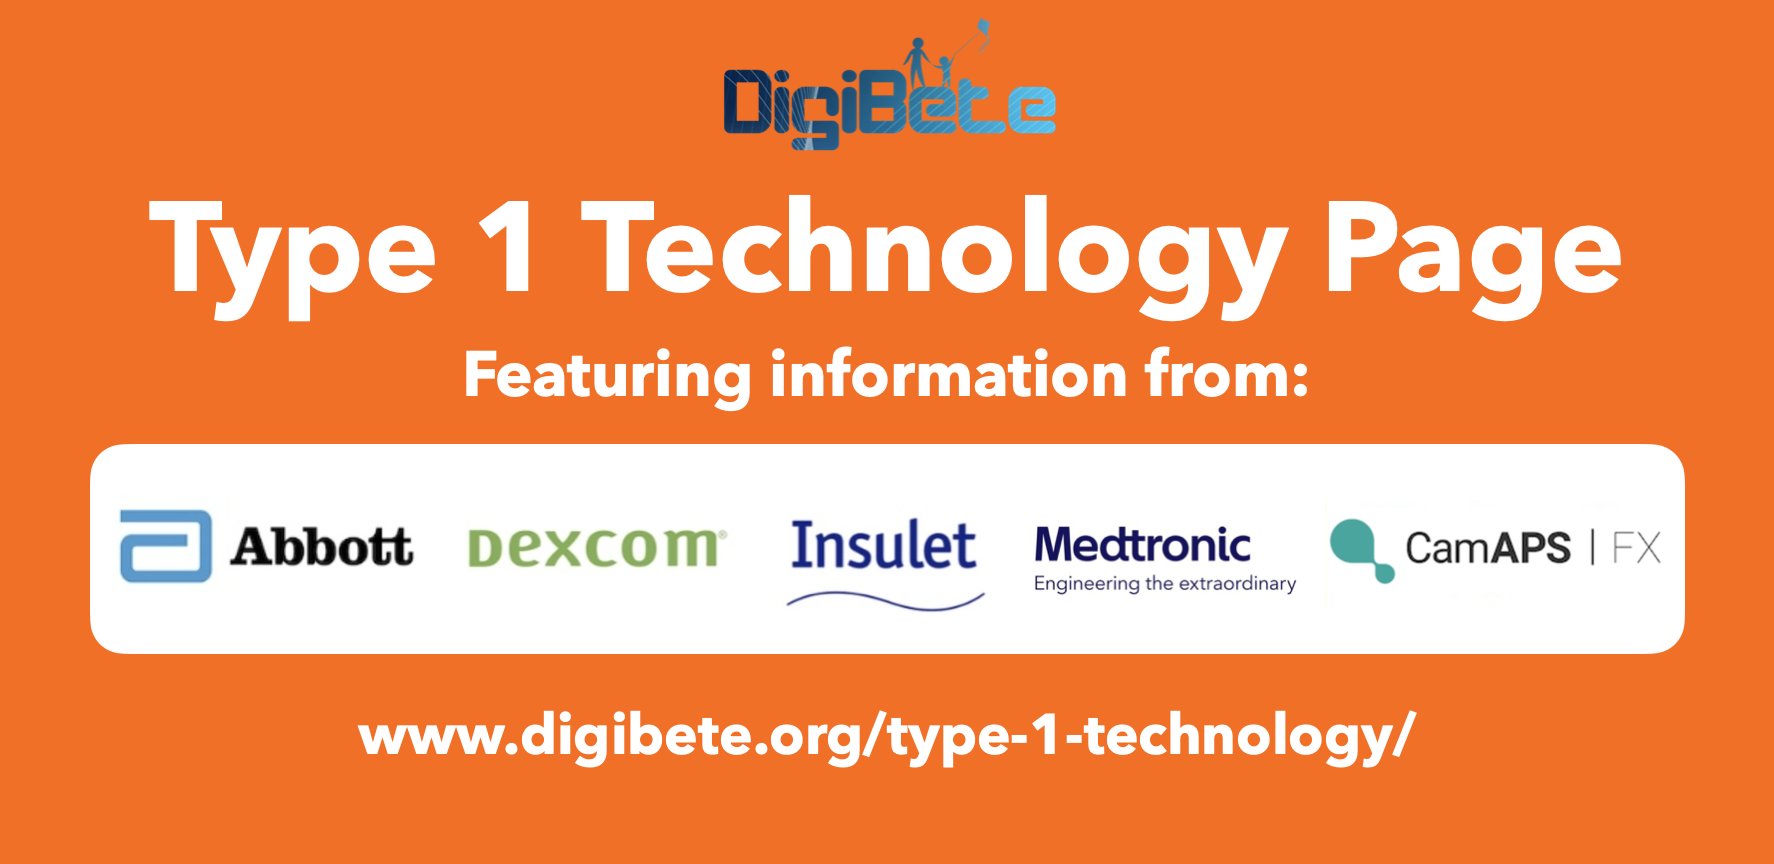 DigiBete's Type 1 Technology Page